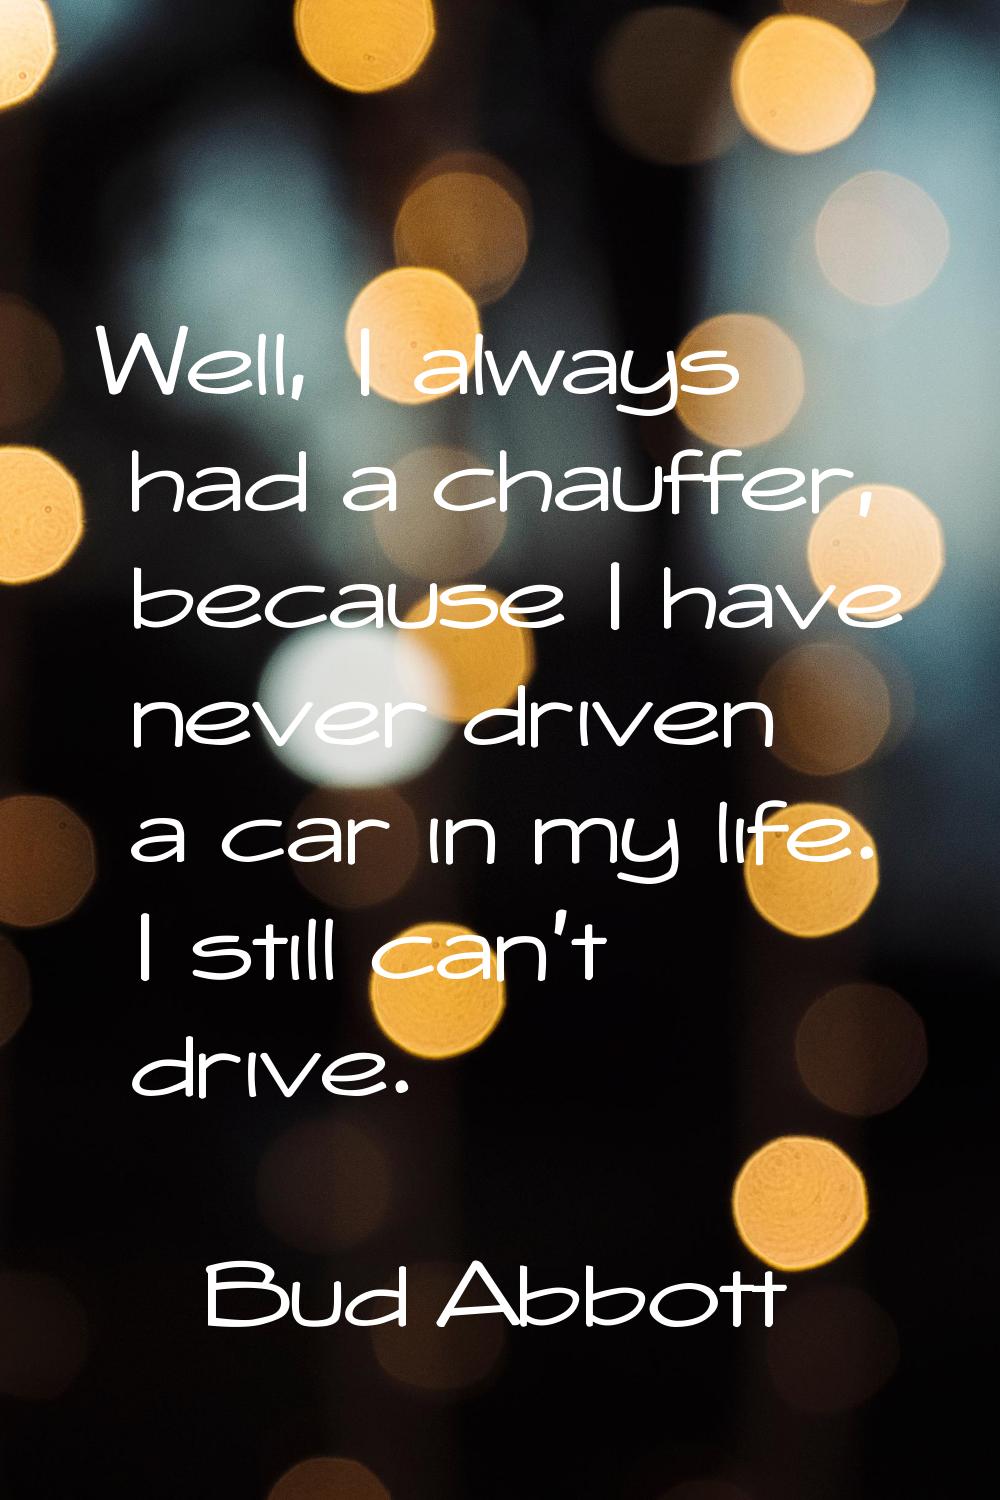 Well, I always had a chauffer, because I have never driven a car in my life. I still can't drive.